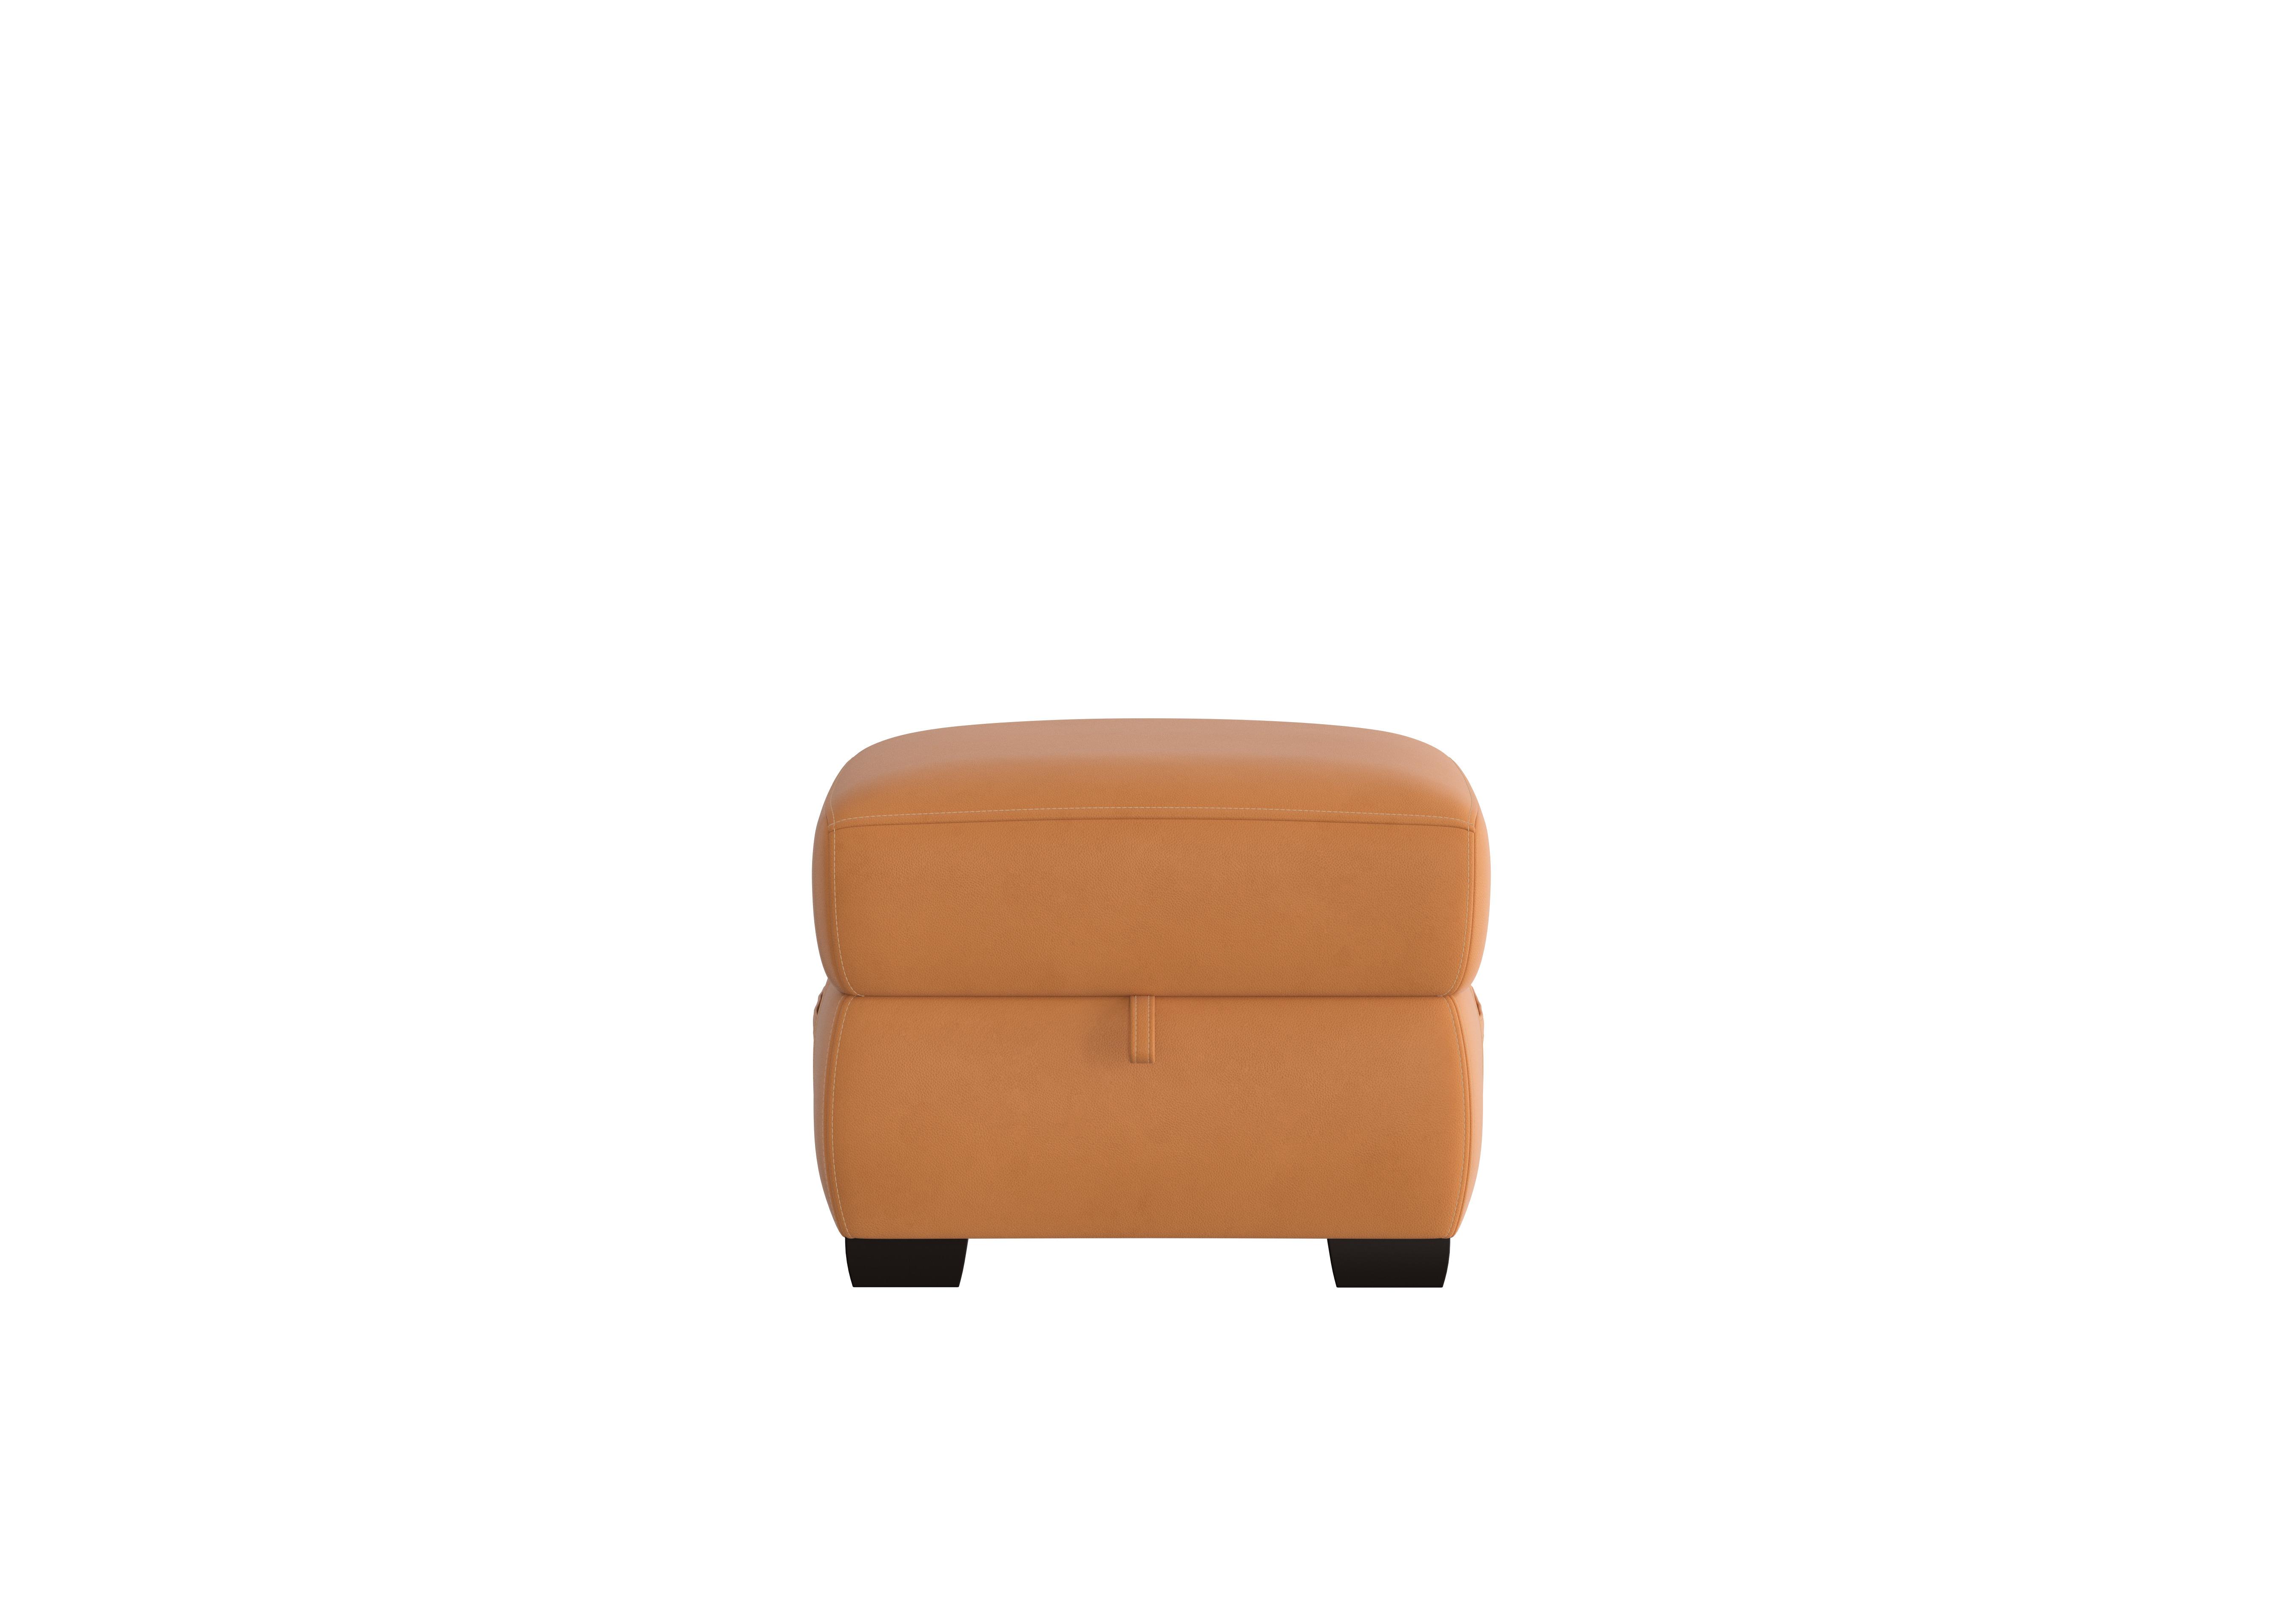 Starlight Express Leather Storage Footstool in Bv-335e Honey Yellow on Furniture Village